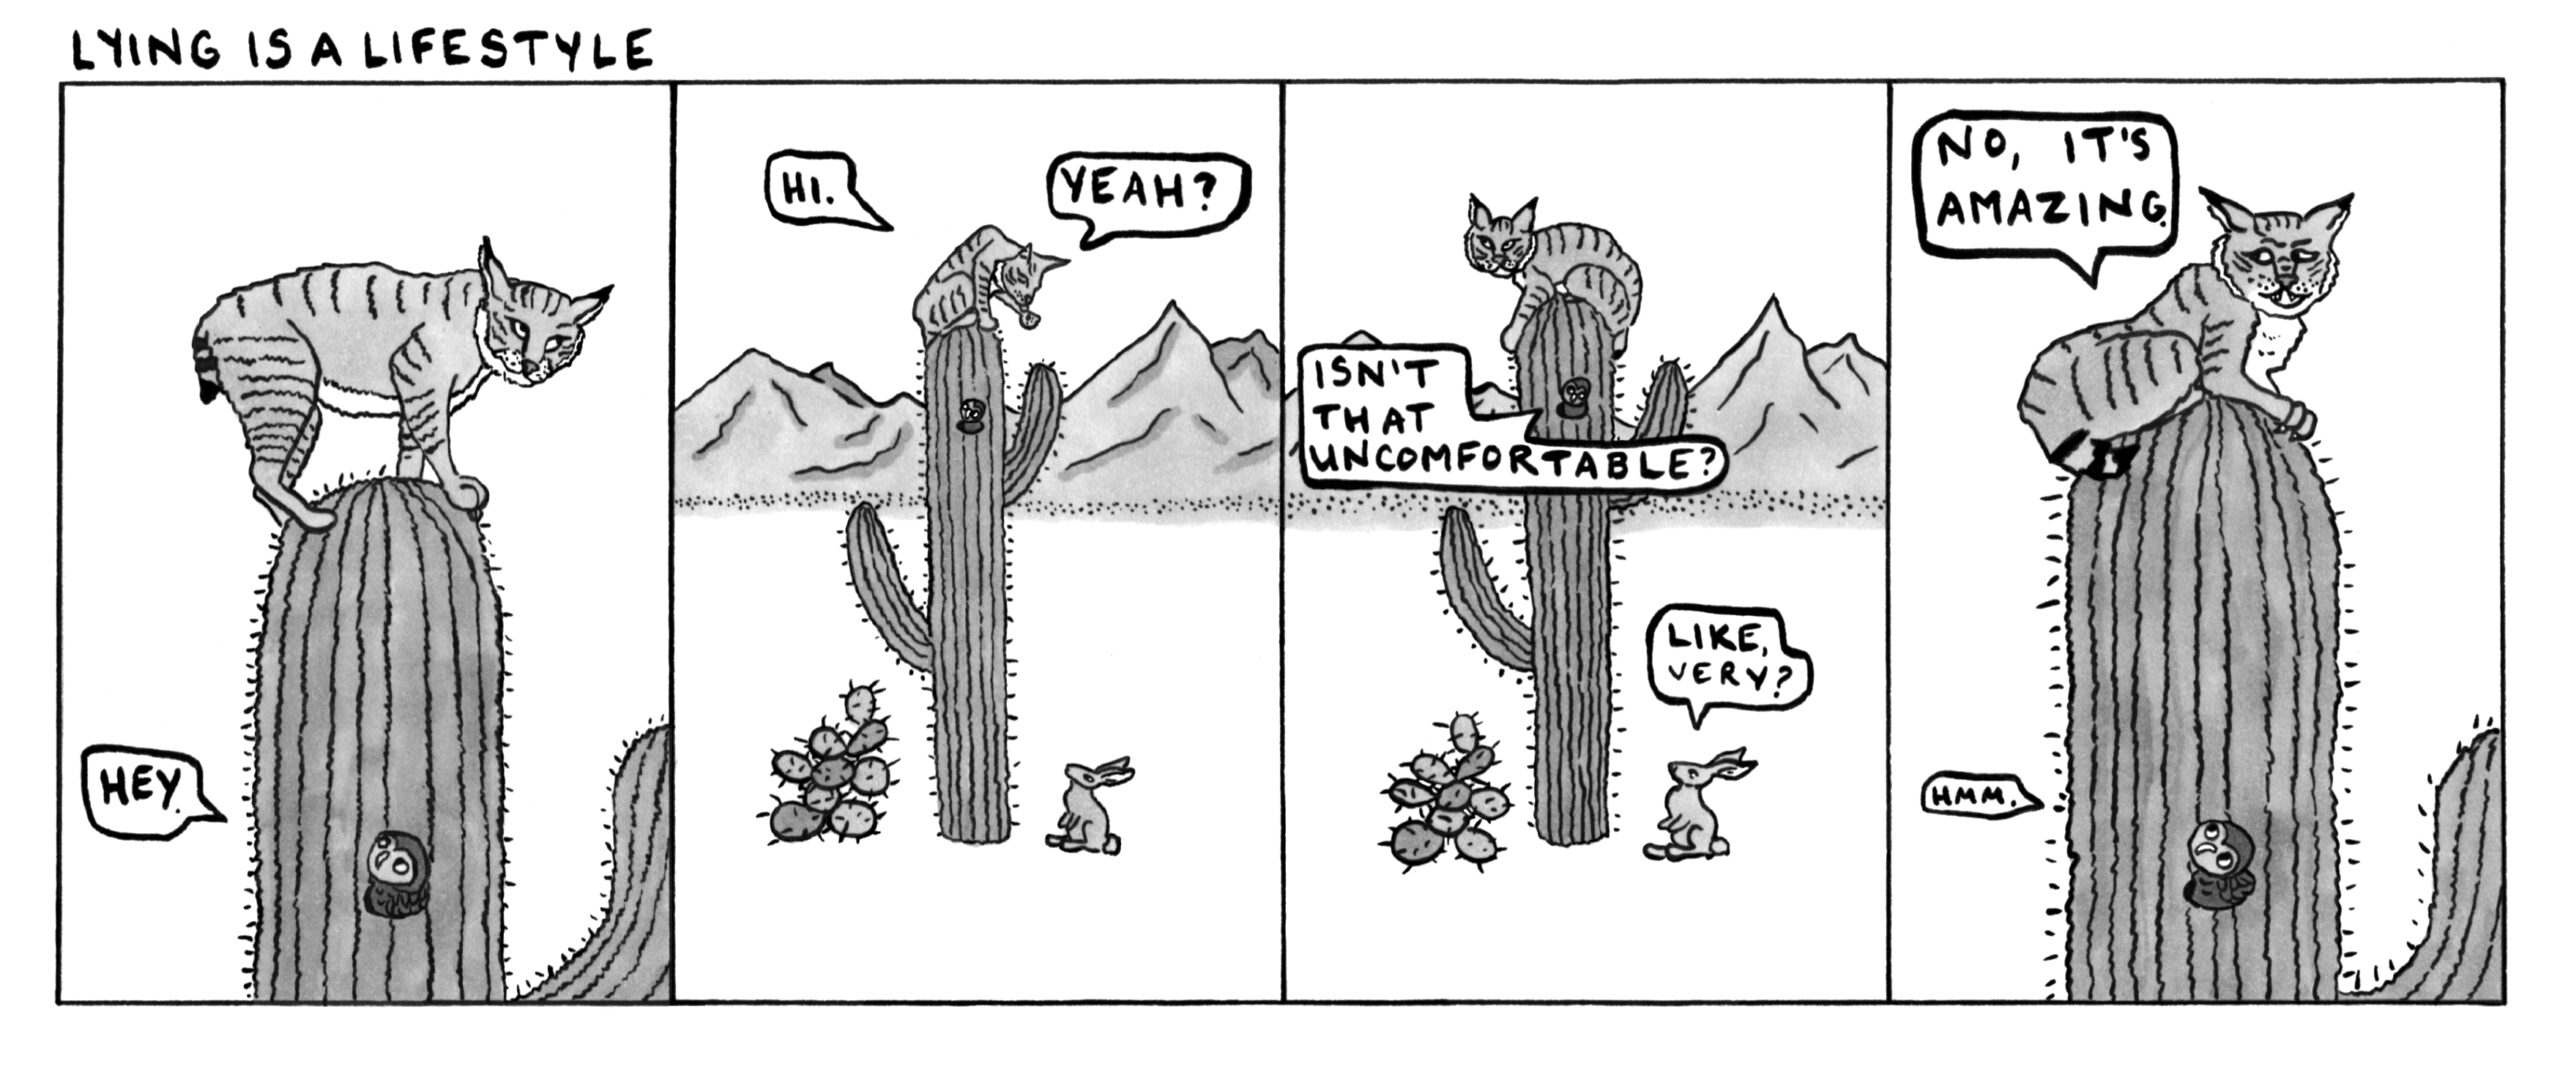 Bobcats really do climb saguaros, so in some ways, the lie here is mine